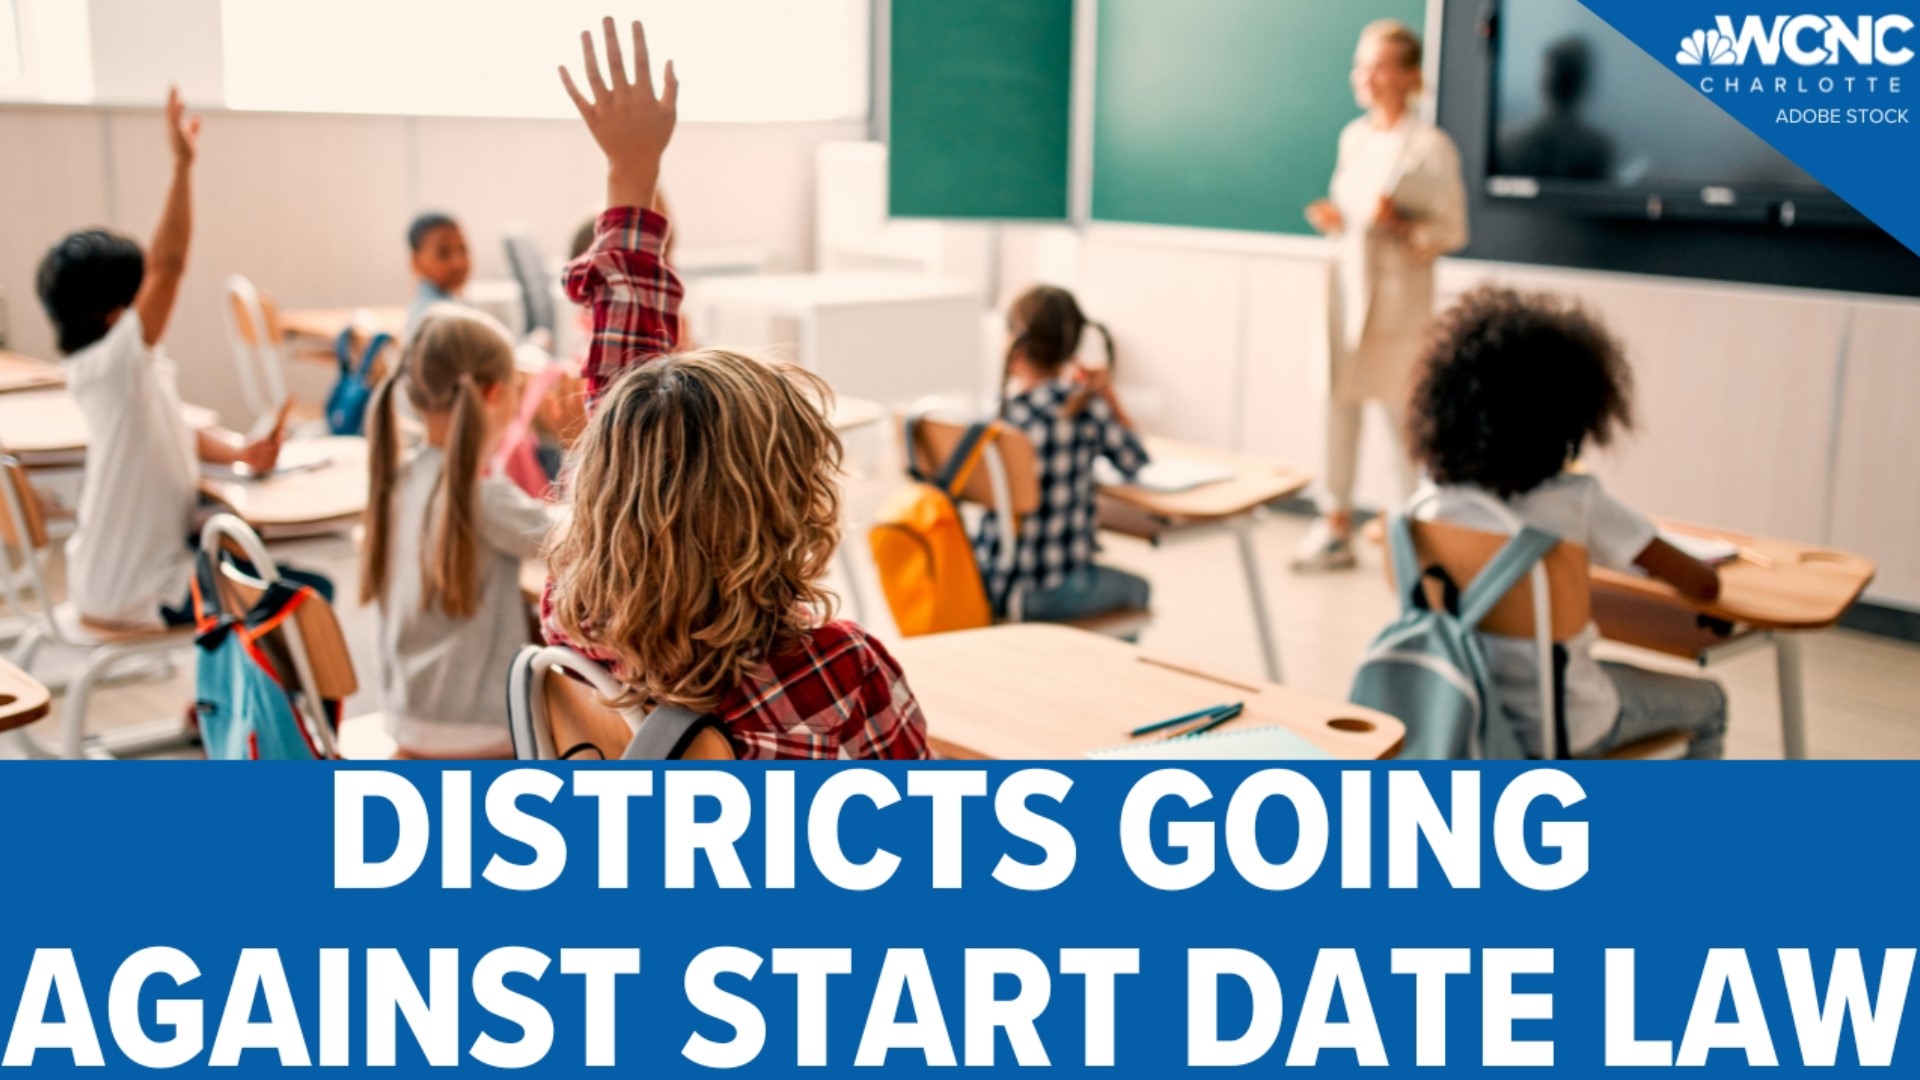 Several school boards in the area have led the wave of districts defying the state law and starting the school year weeks before it's allowed.